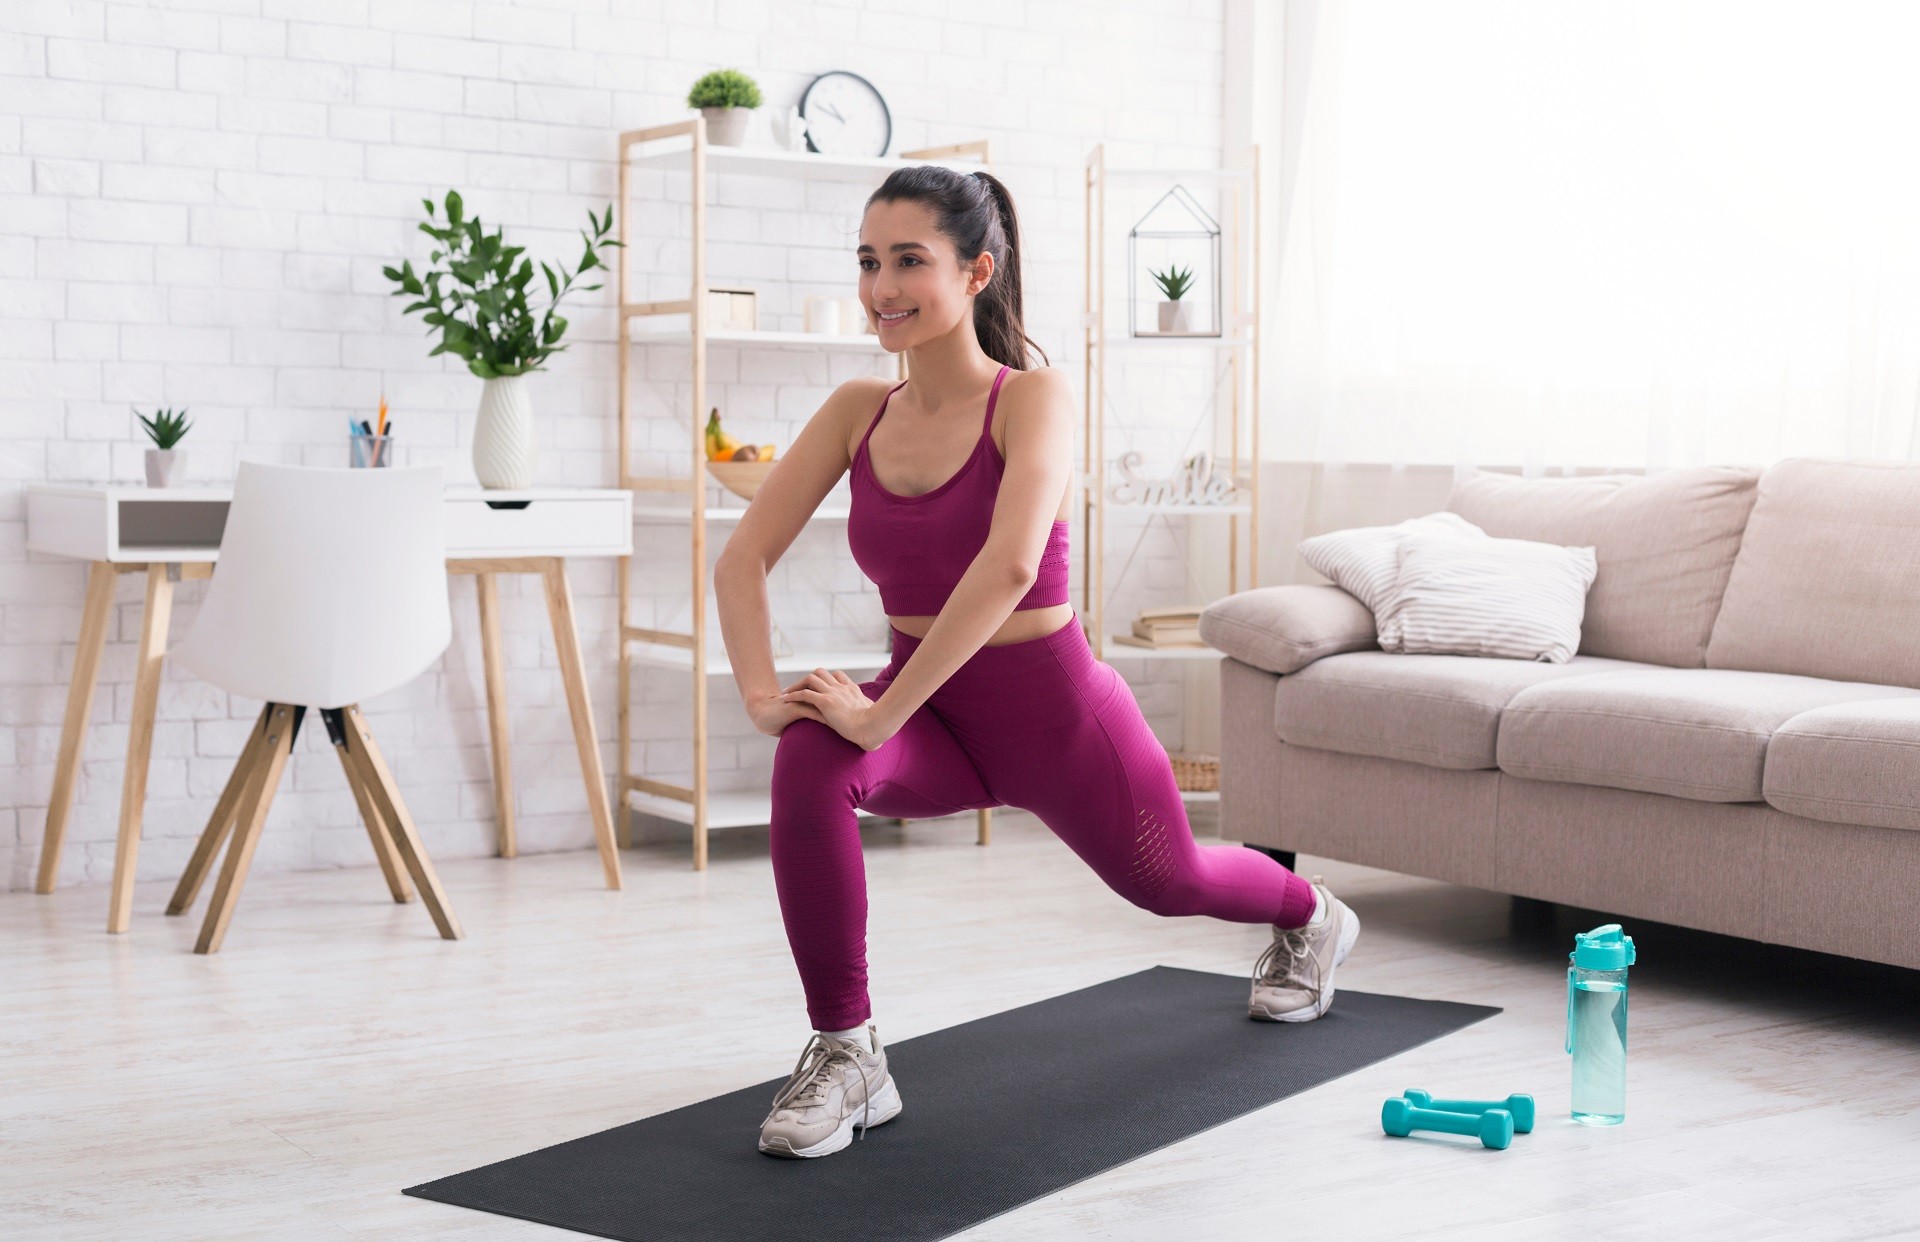 7 Powerful Ways to Work Out at Home